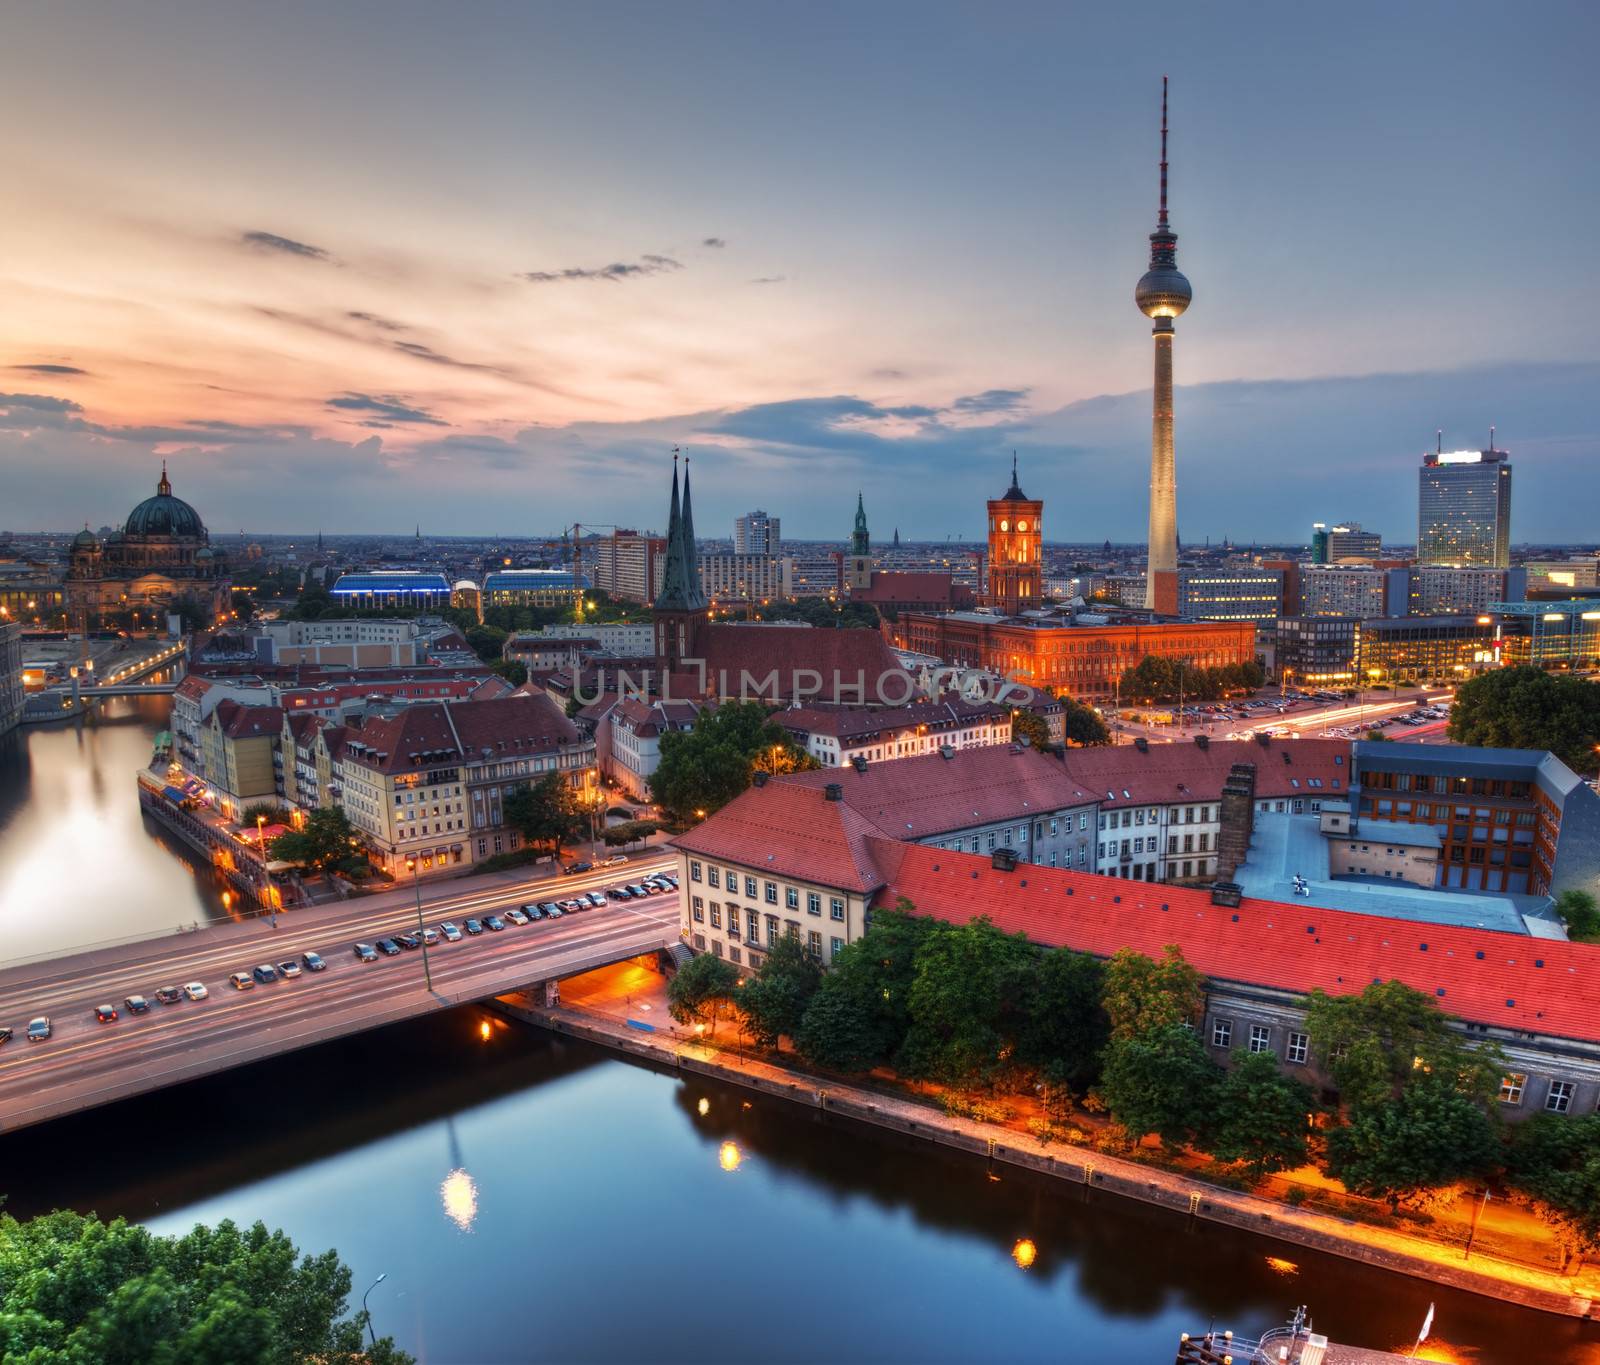 Berlin, Germany rooftop view on Television Tower, Berlin Cathedral, Rotes Rathau and the River Spree - the major landmarks at late sunset